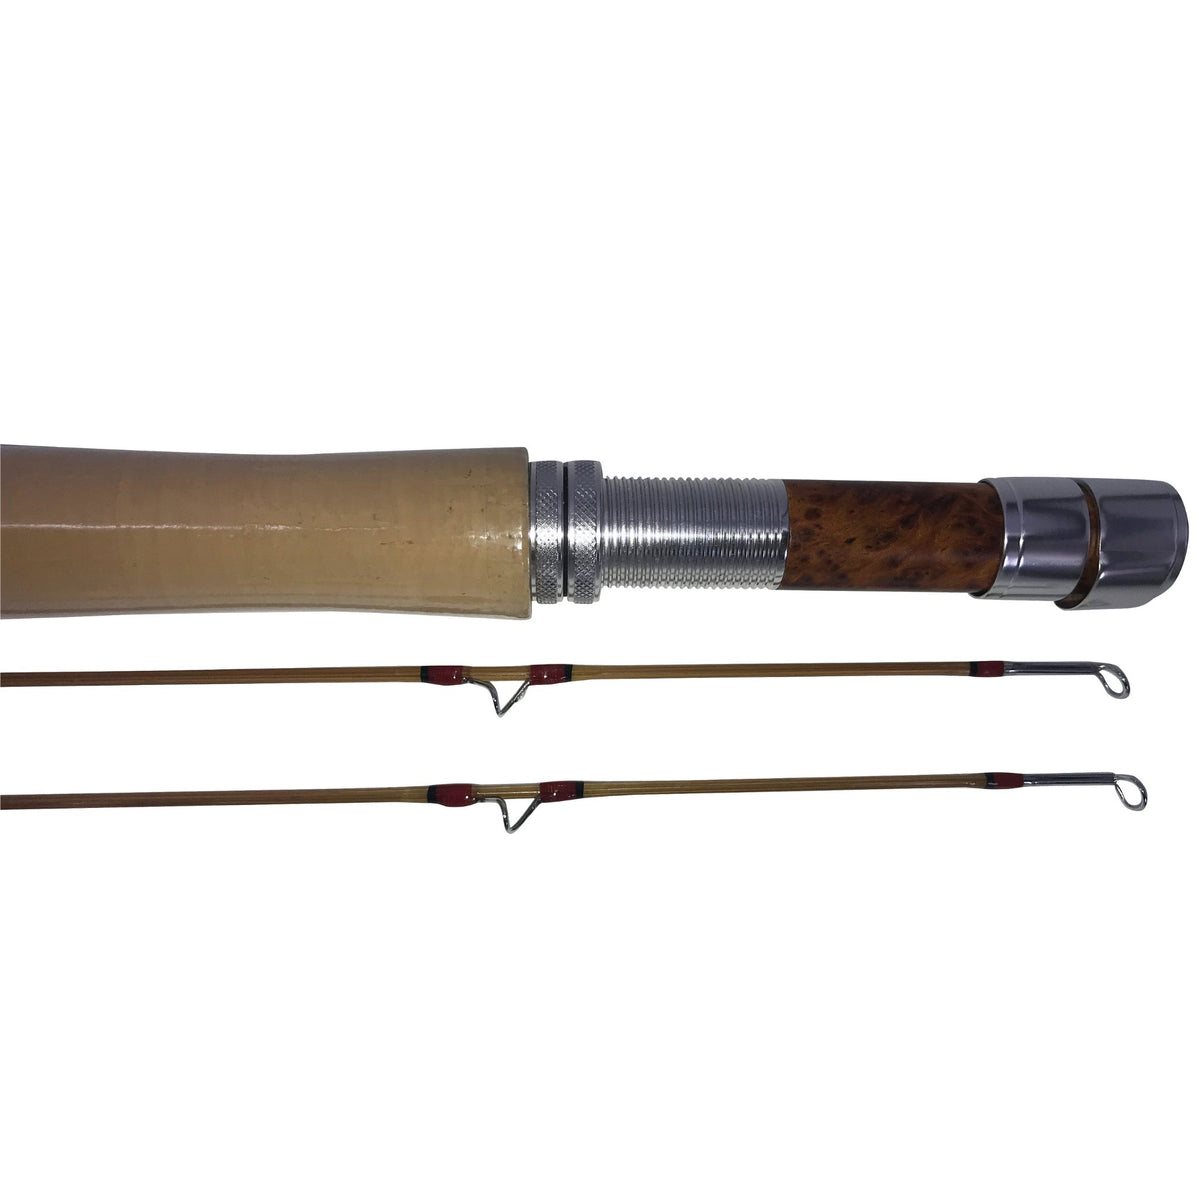 Deluxe Santiam 7' 0 4-wt Medium Action Bamboo Fly Rod - Headwaters Bamboo